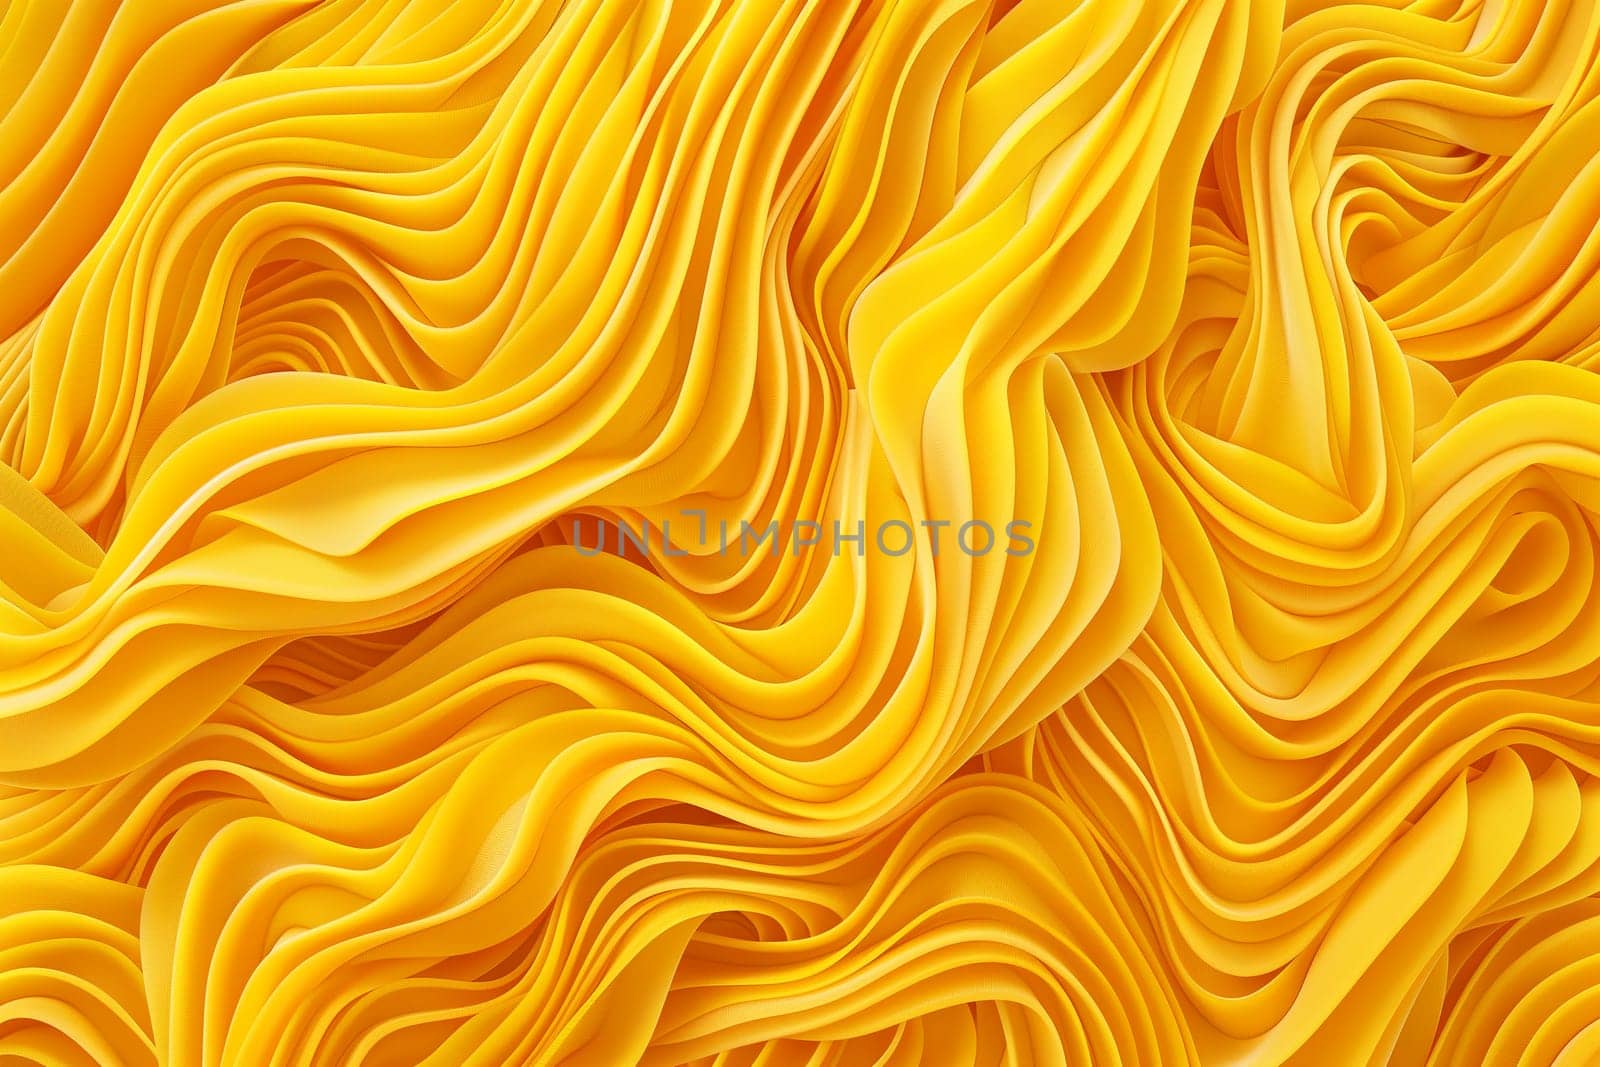 Detailed view of a bright yellow background featuring wavy lines in varying thickness and direction.